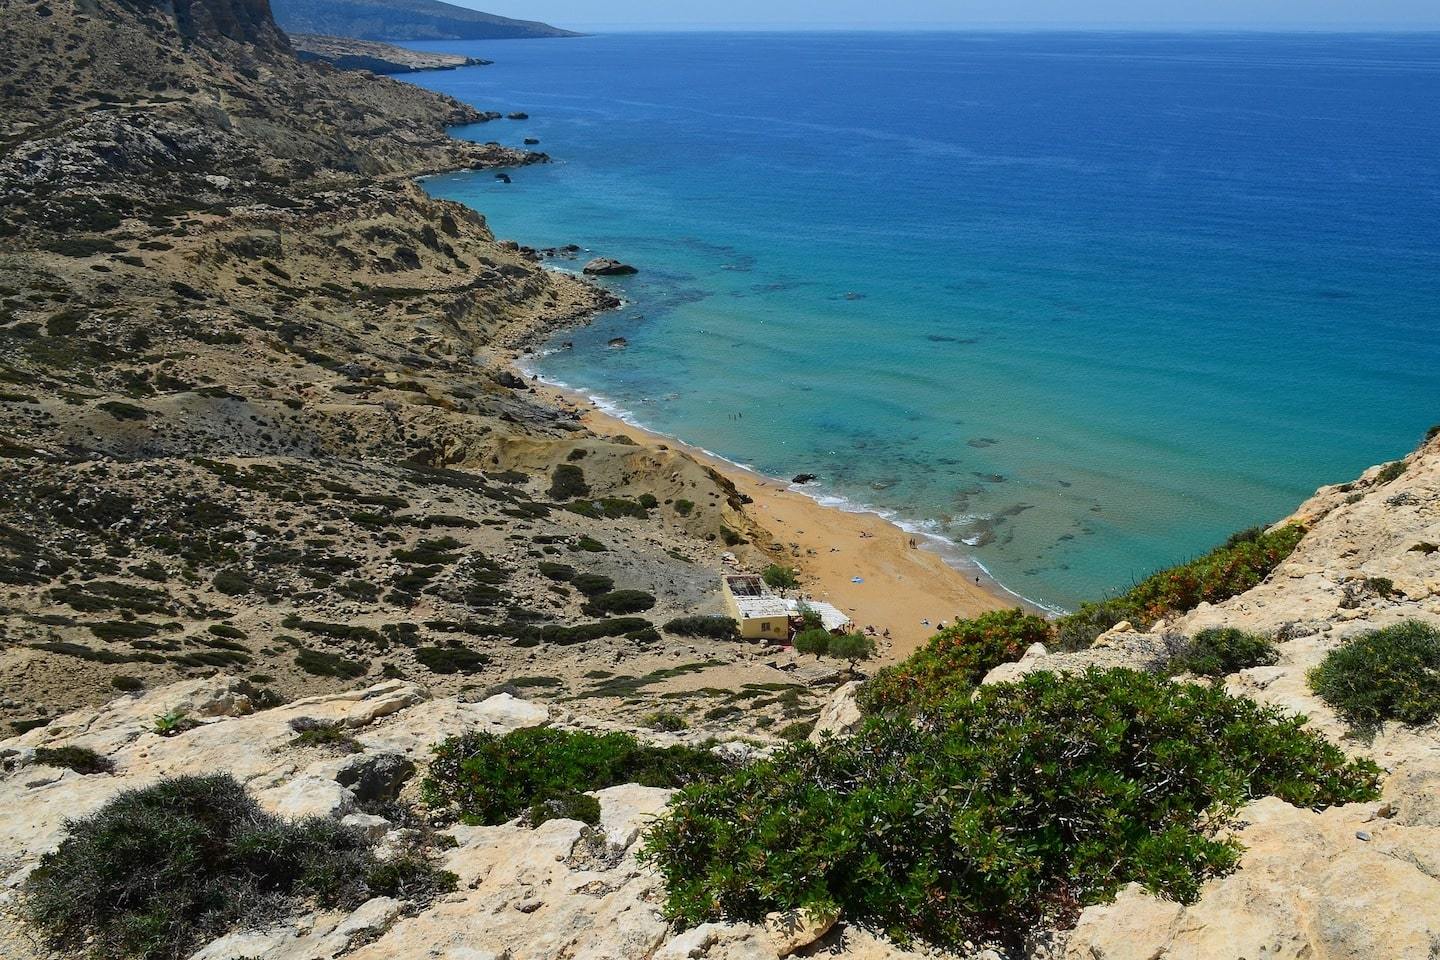 view of beach from above surrounded by rocks, cliffs and the sea in Crete, Greece